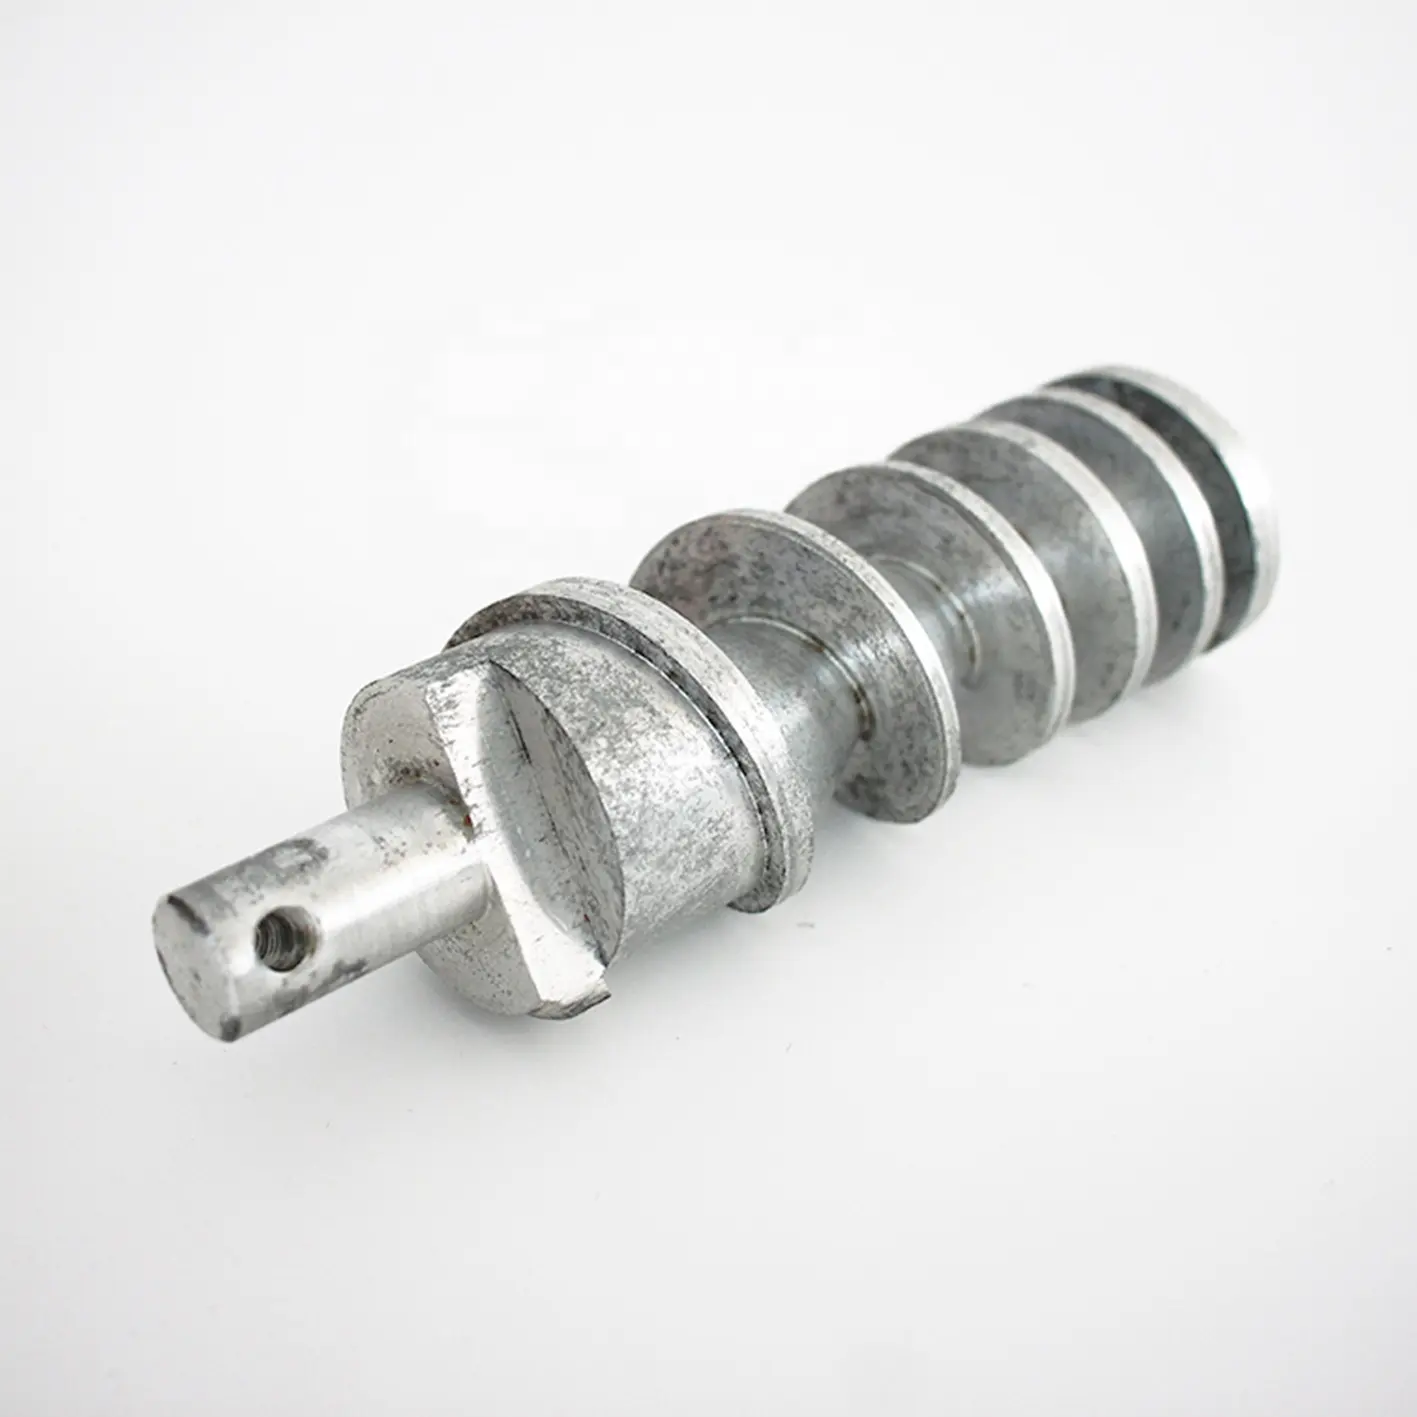 OEM Stainless Steel Aluminum CNC Machining Parts Prototype Milled Turned Part Custom CNC Machining Services